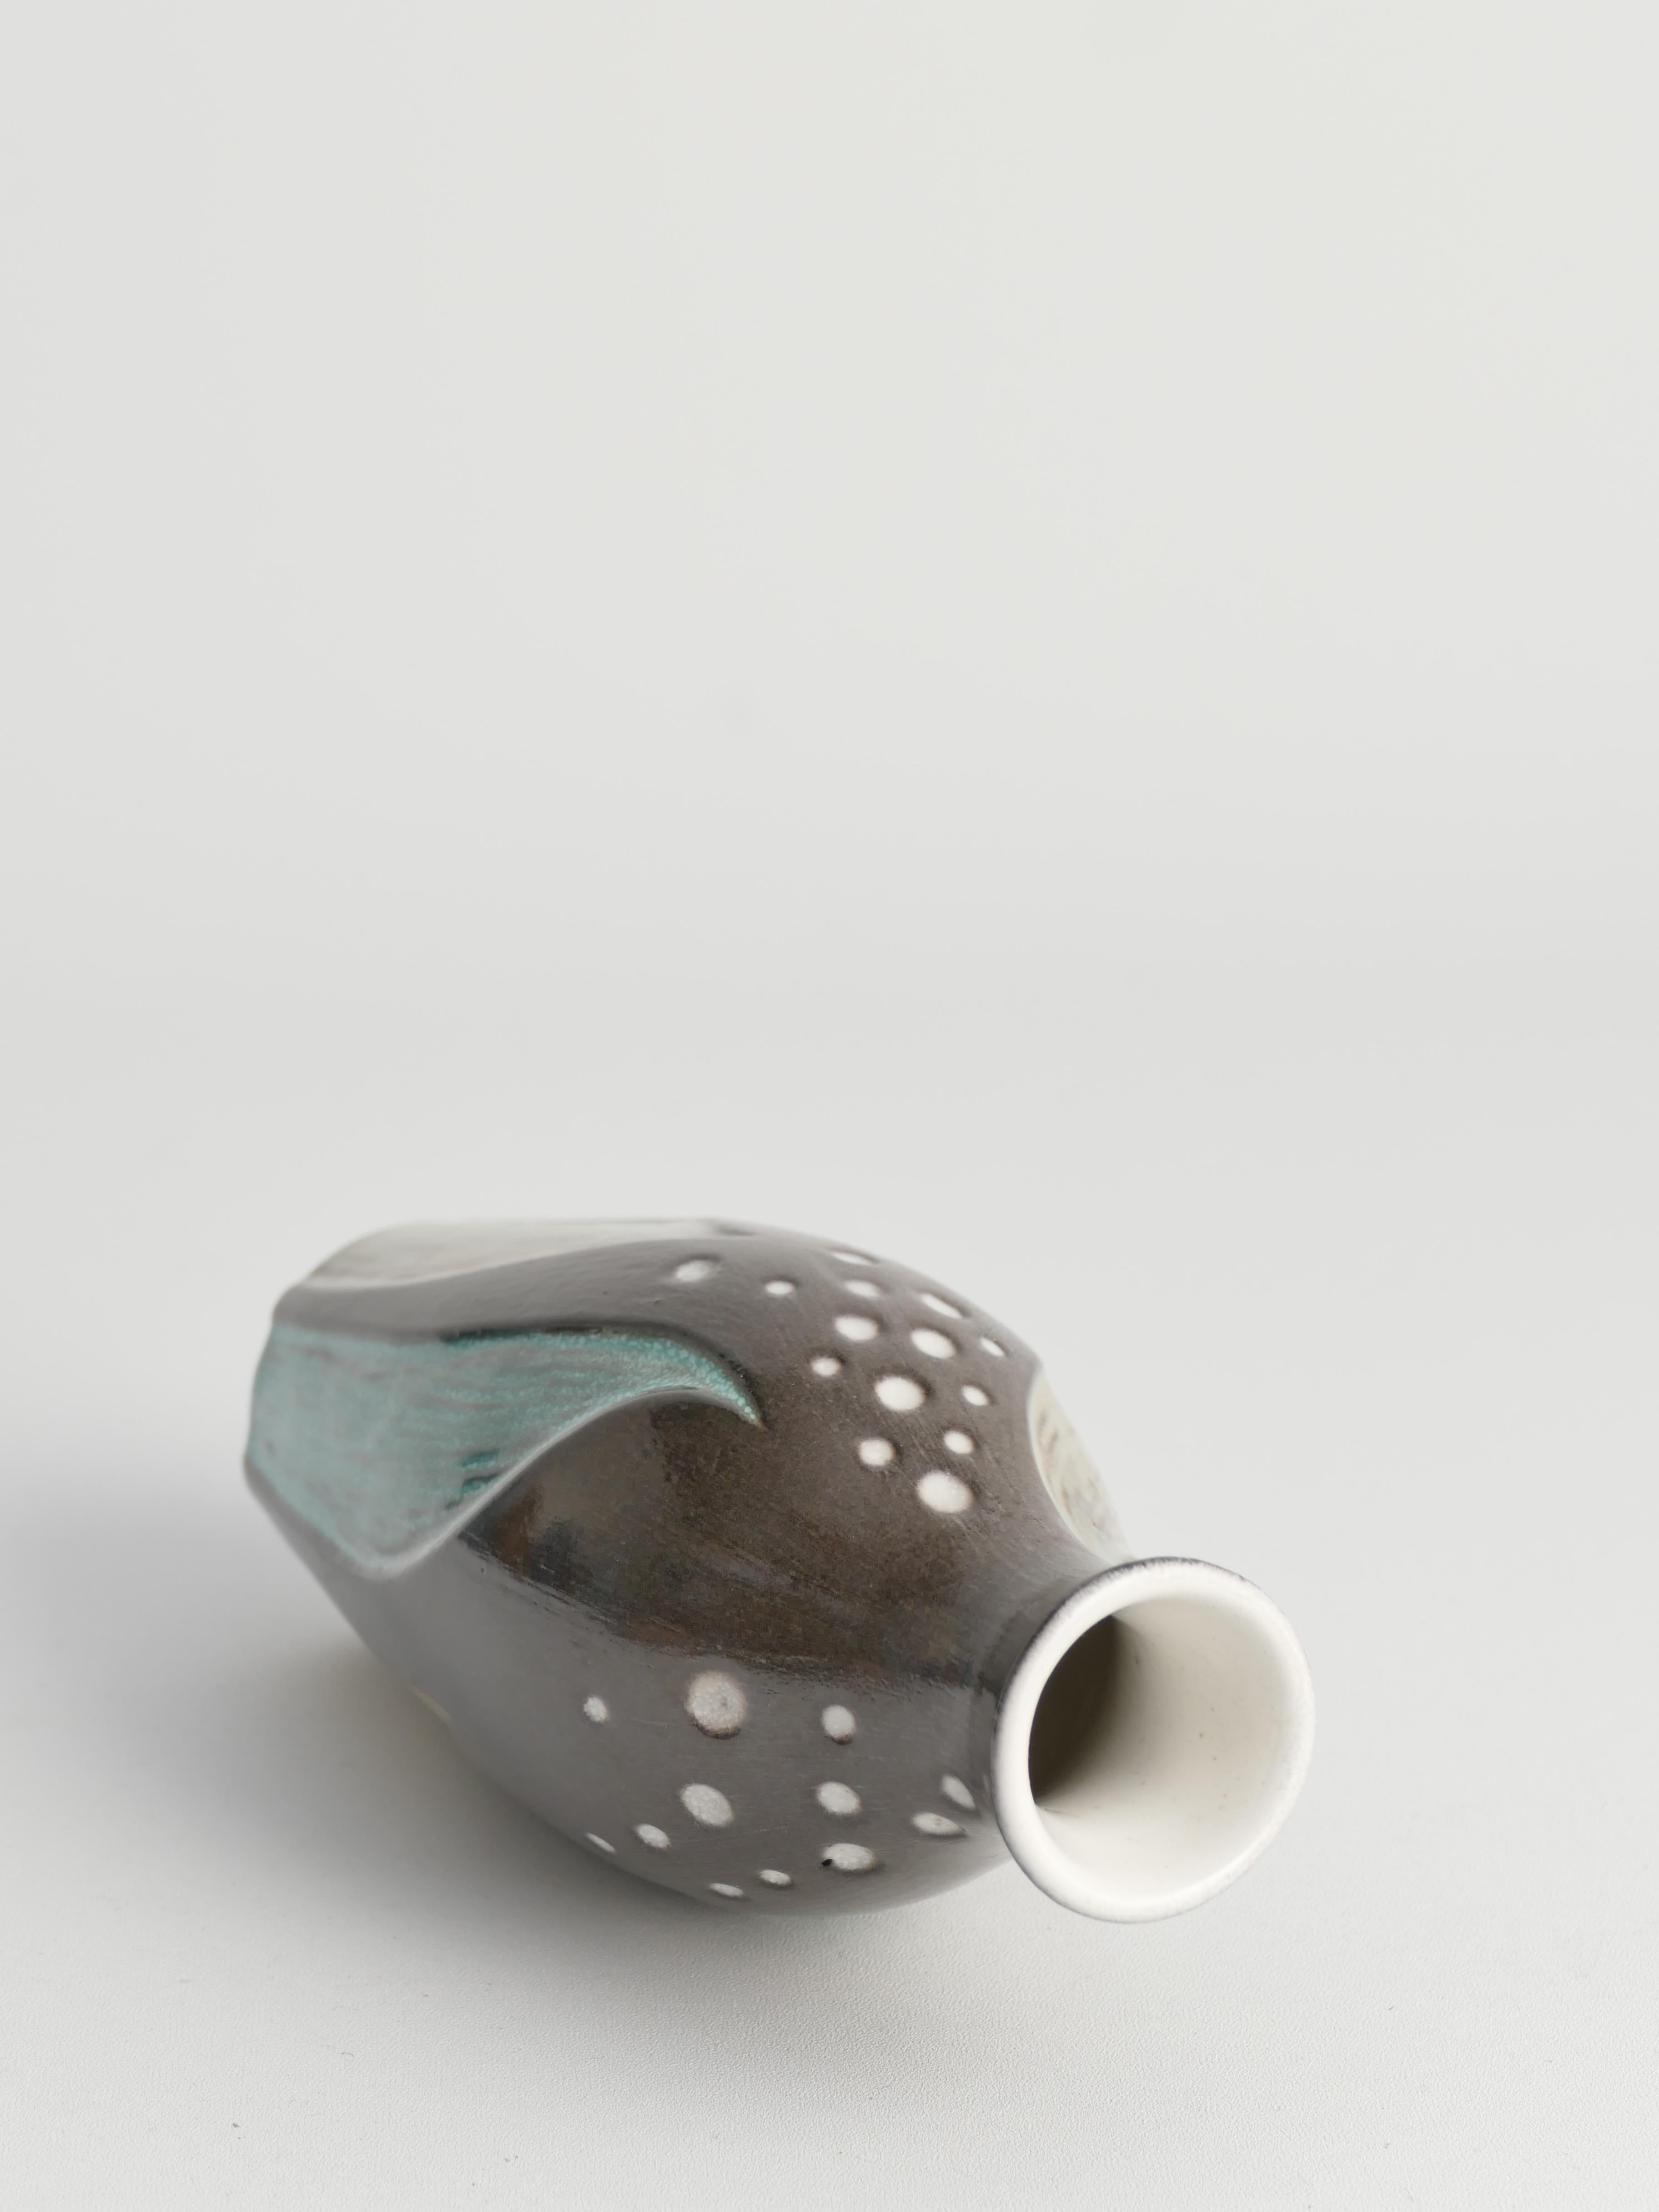 Ceramic Vase with Seaweed Motif by Mari Simmulson for Upsala Ekeby, Sweden 1950s For Sale 4